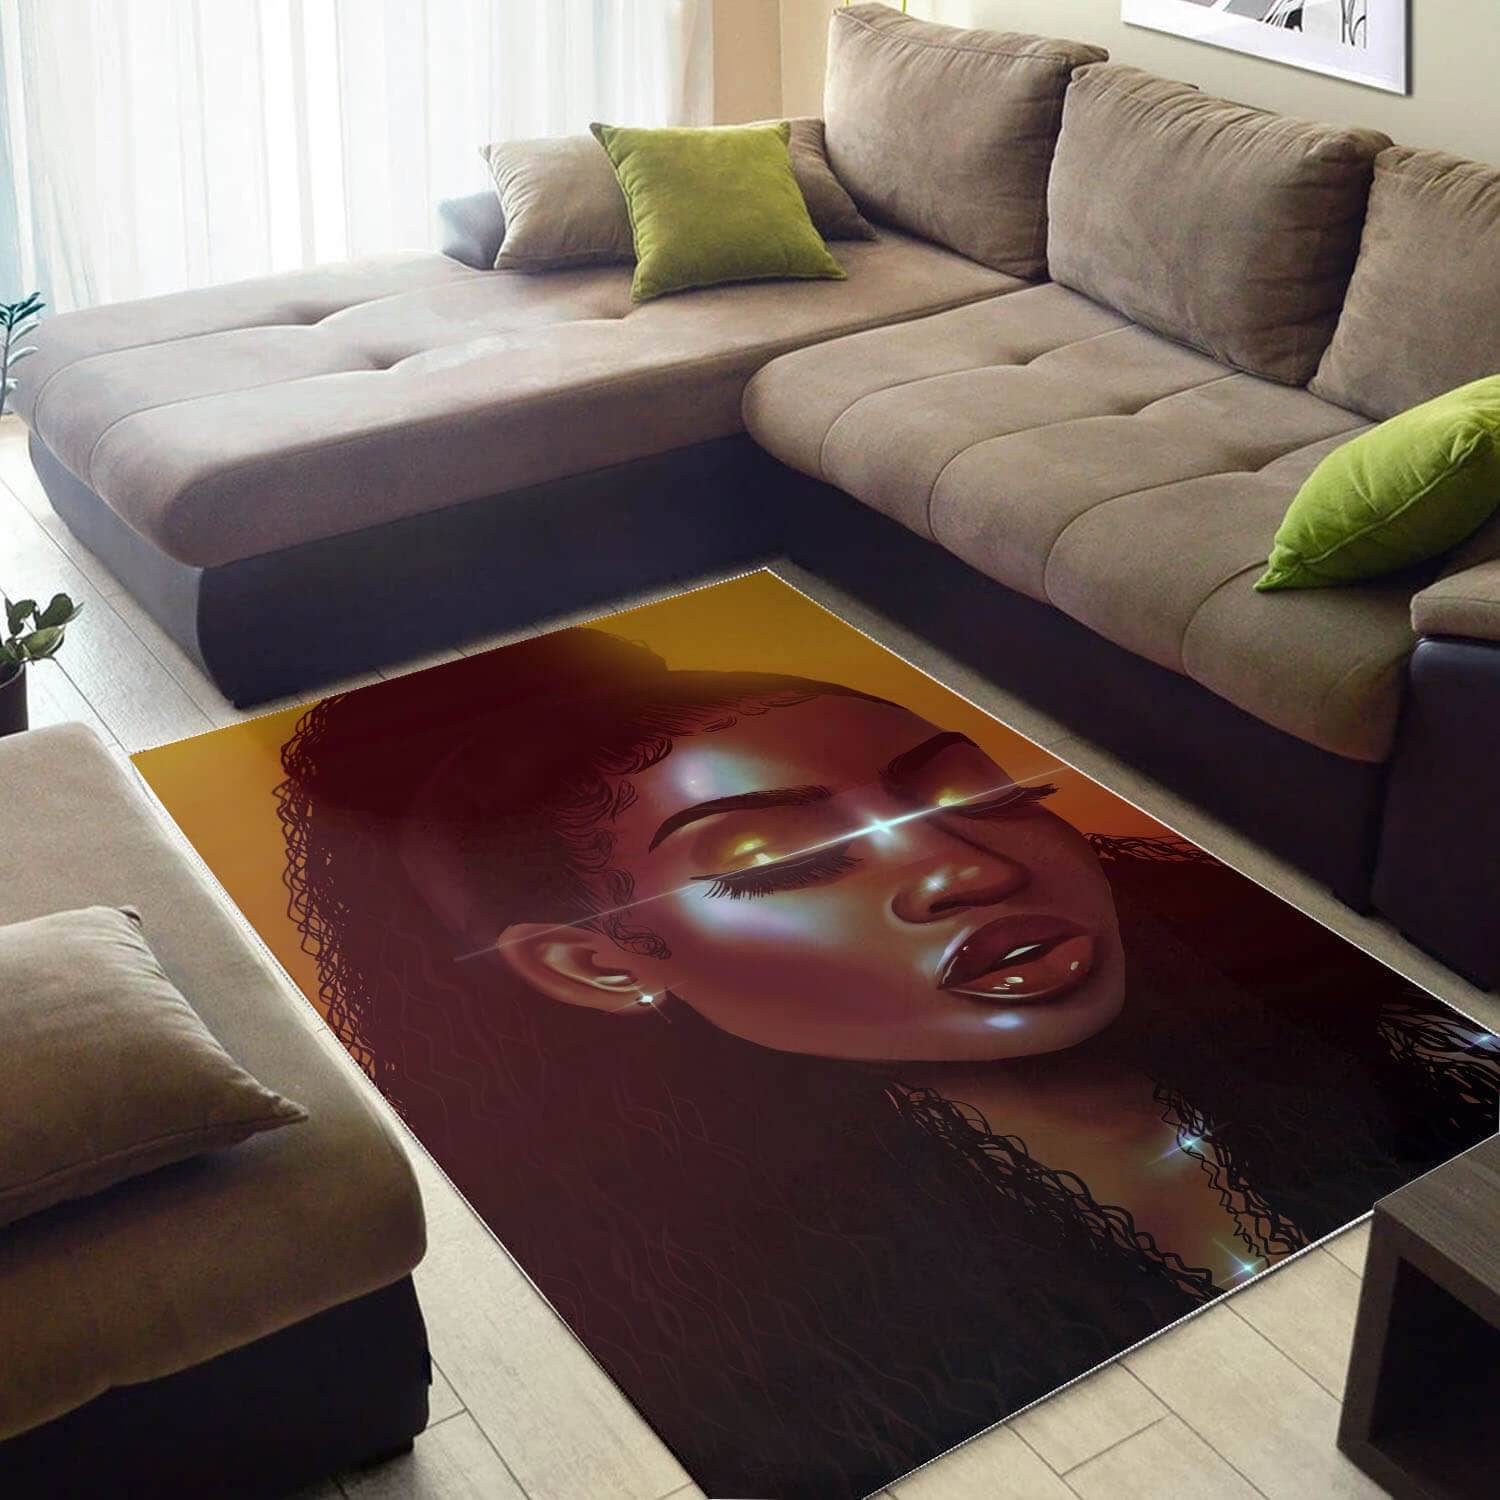 Afrocentric Beautiful Girl With Afro African American Print Modern Themed Living Room Rug